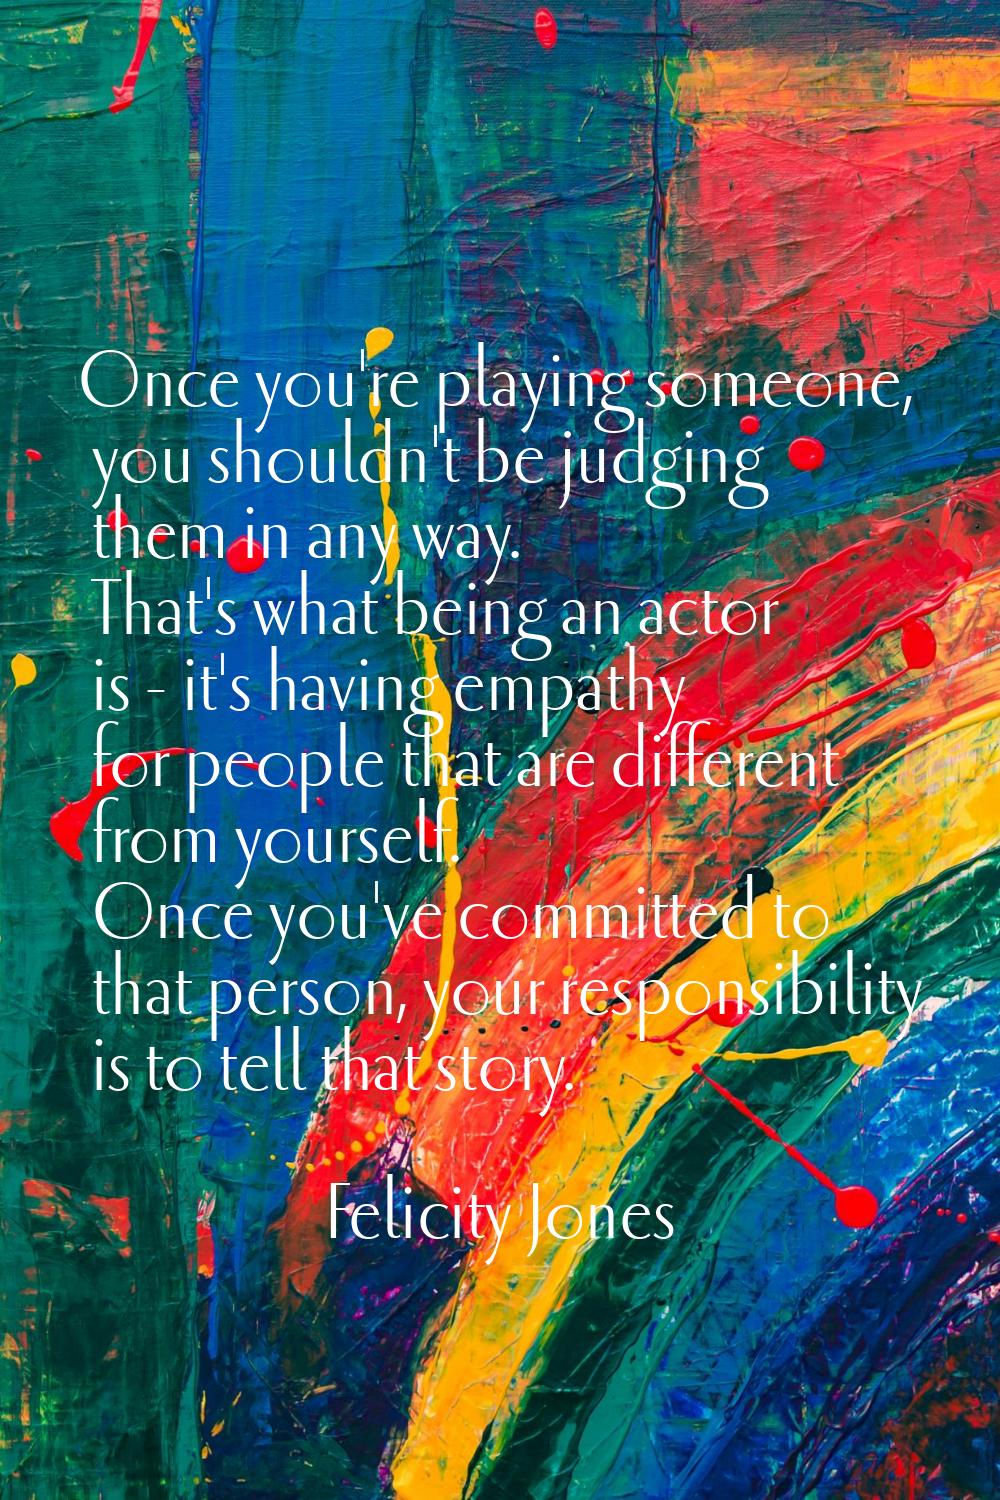 Once you're playing someone, you shouldn't be judging them in any way. That's what being an actor i